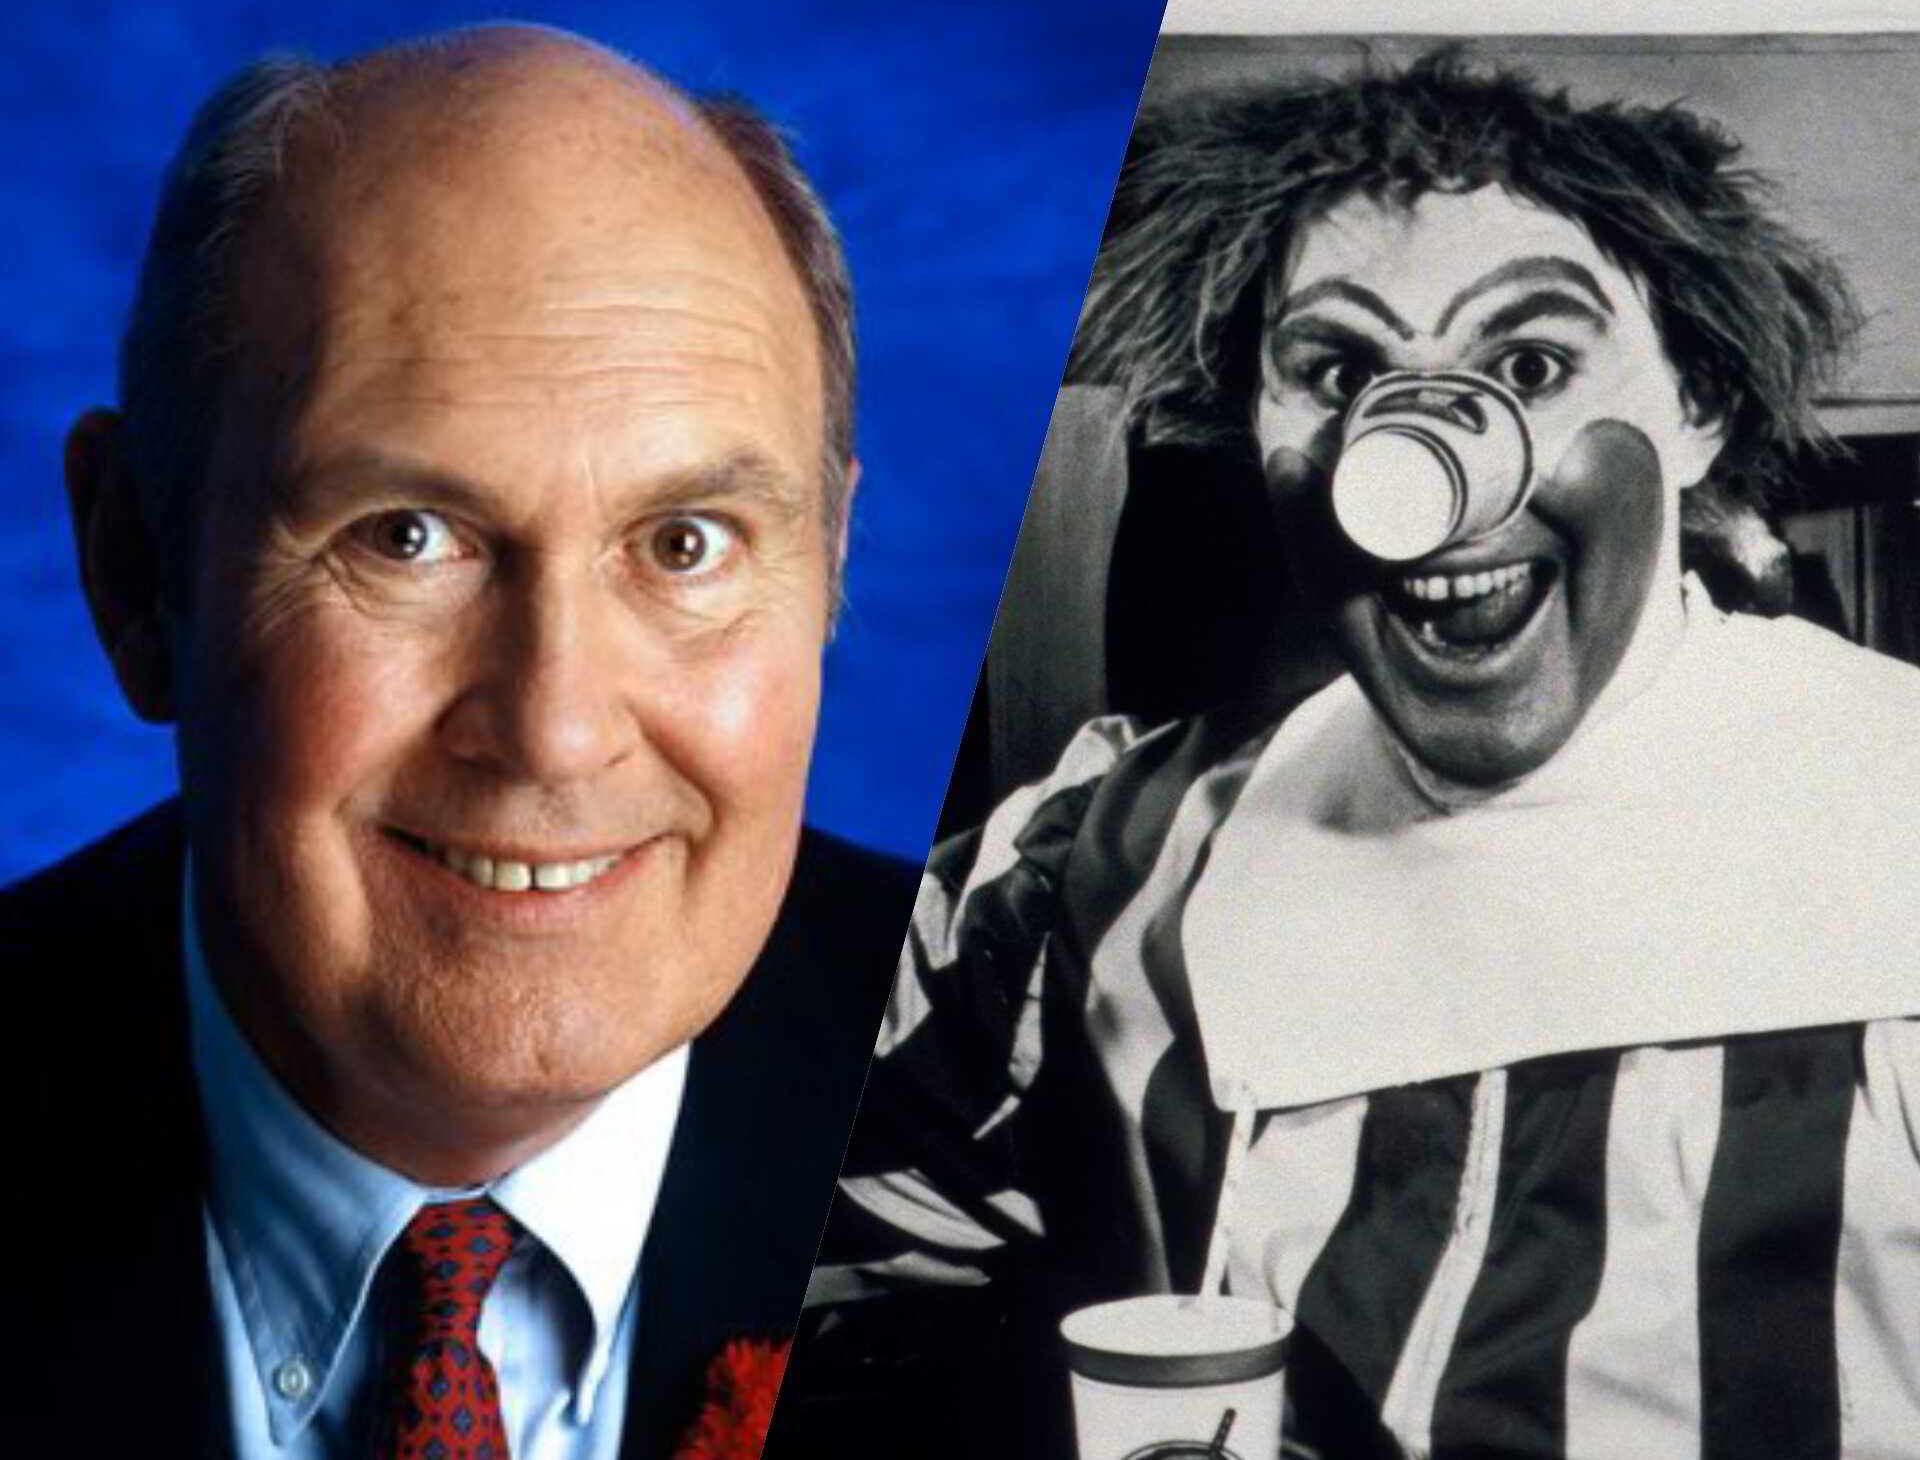 Who Played Ronald Mcdonald In The Original Television Commercial